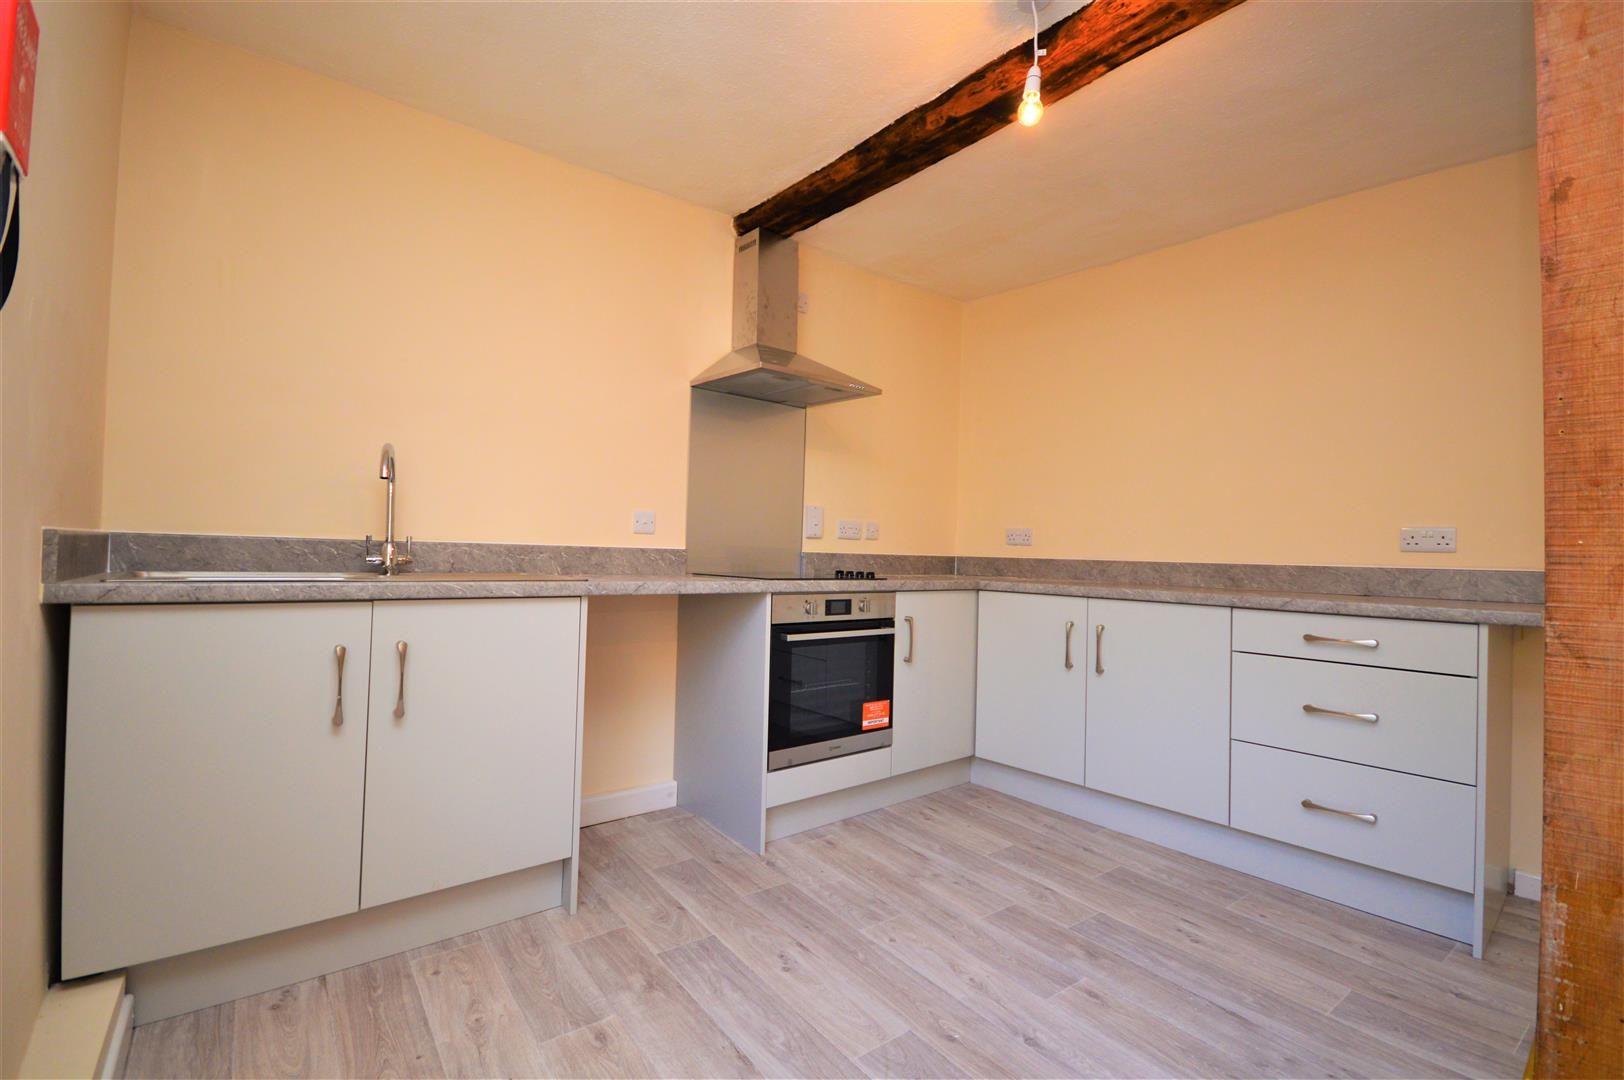 2 bed  for sale in Hereford 9